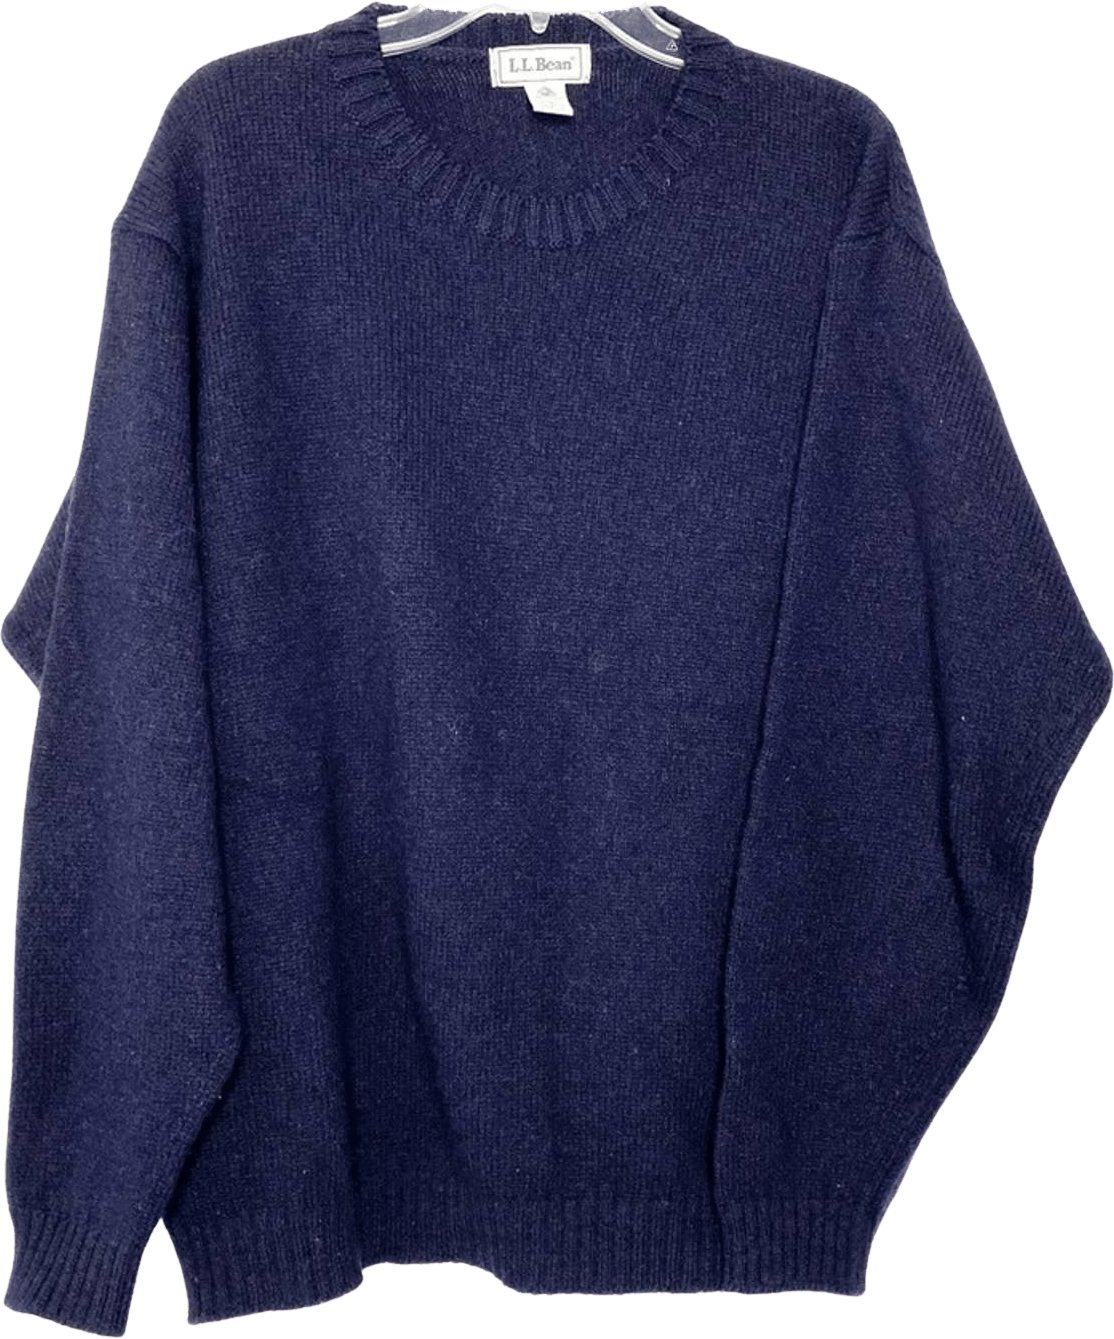 Vintage Navy Blue Wool Crew Neck Sweater by L. L. Bean | Shop THRILLING